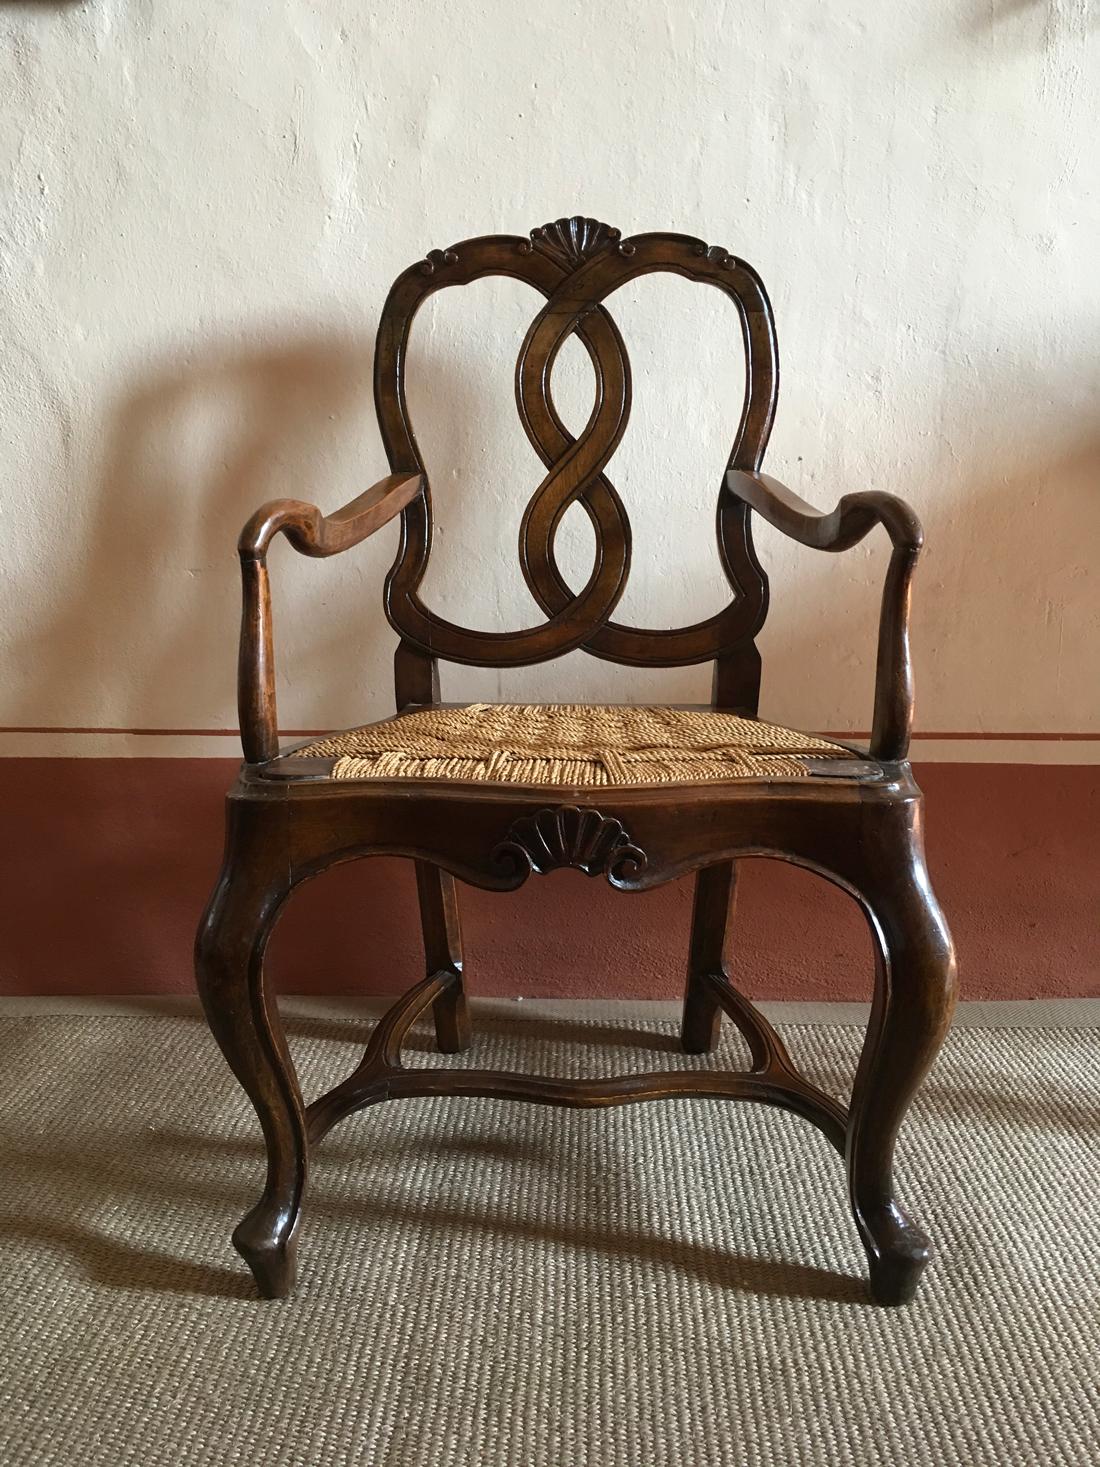 Mid-18th Century  baroque hand-carved 1750 Venetian walnut armchair.
Straw seat not original.
The 18th Century was in Venice the Golden Age and this armchair is a remarkable work by Venetian cabinetmakers. The carvings' refinement enhance its